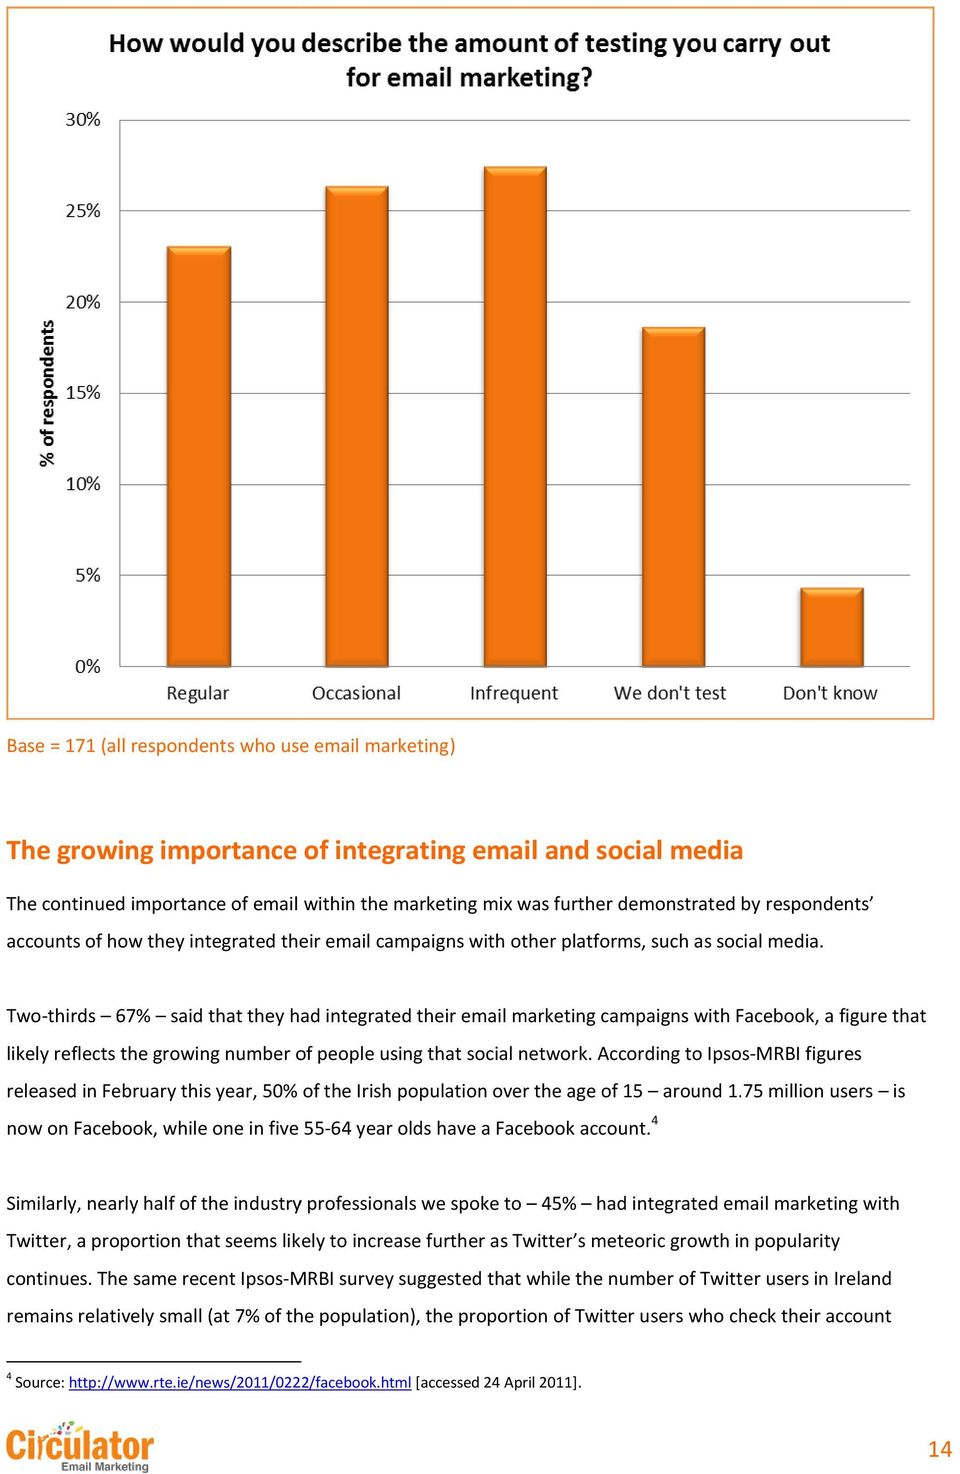 Two-thirds 67% said that they had integrated their email marketing campaigns with Facebook, a figure that likely reflects the growing number of people using that social network.